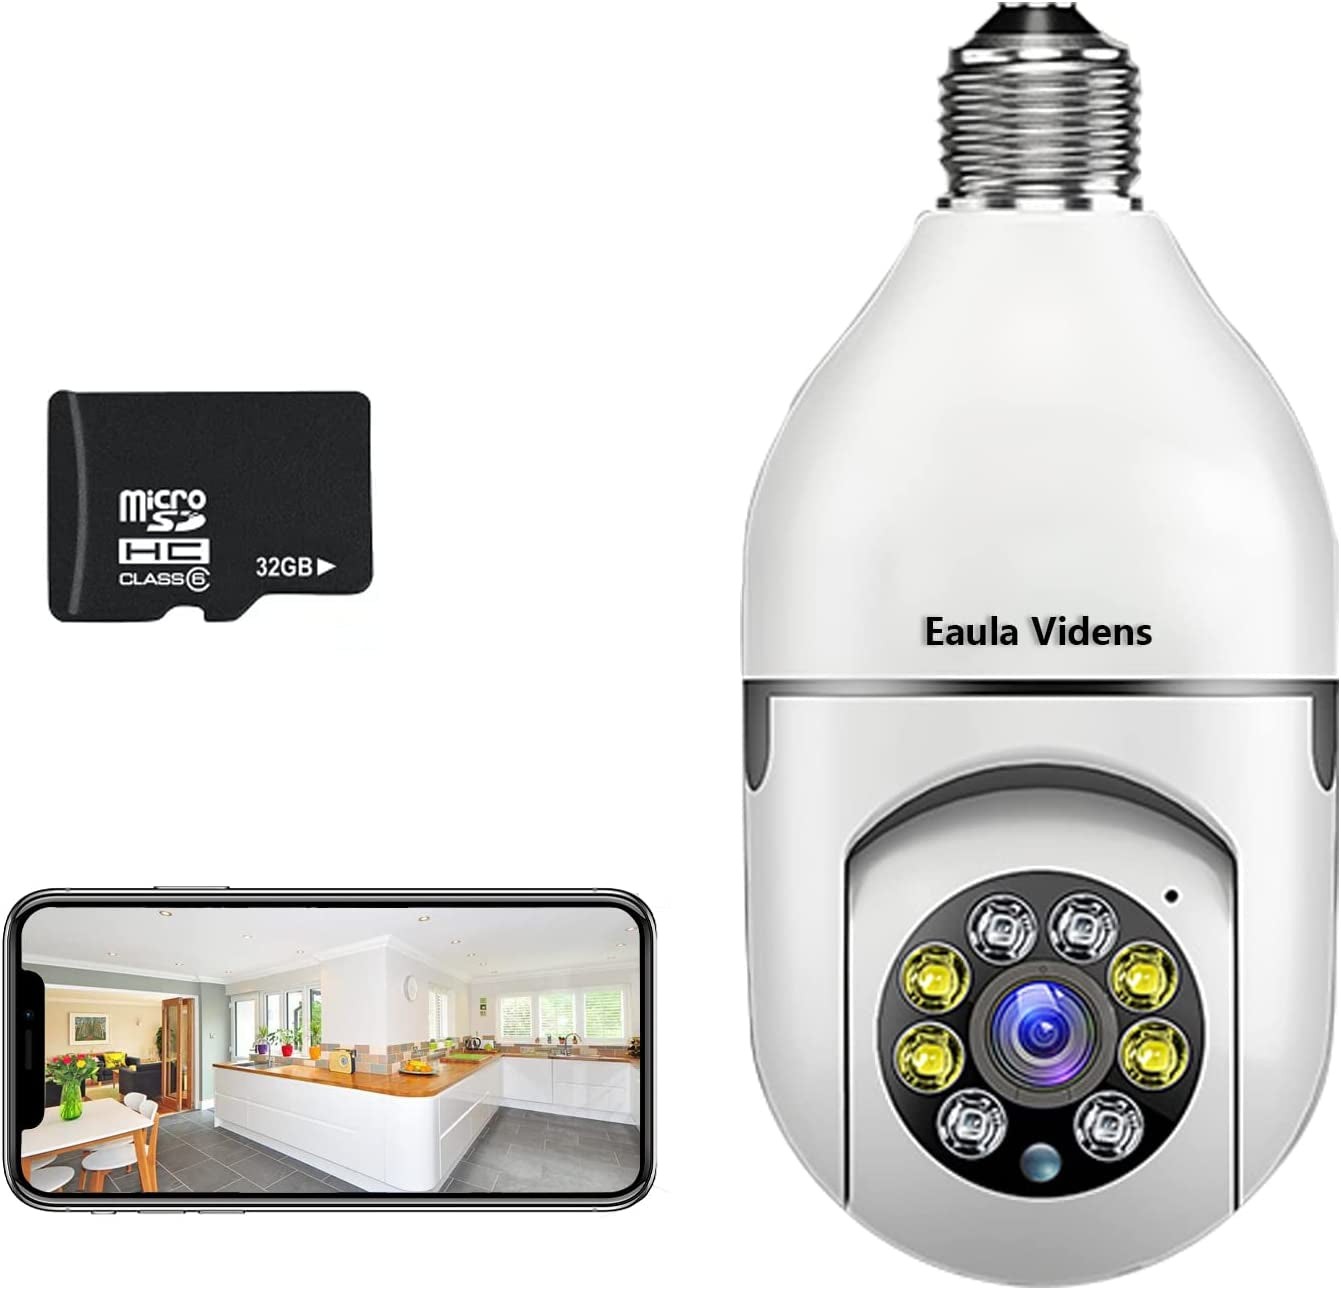 Eaula Videns, Light Bulb Security Camera 1080P, PTZ Wifi 360 Degree E27 Panoramic IP Camera,Night Vision Color, Motion Detection,Support WIFI2.4GHZ/5.0GHZ, APP Access(White) (Security Camera+32Gb)